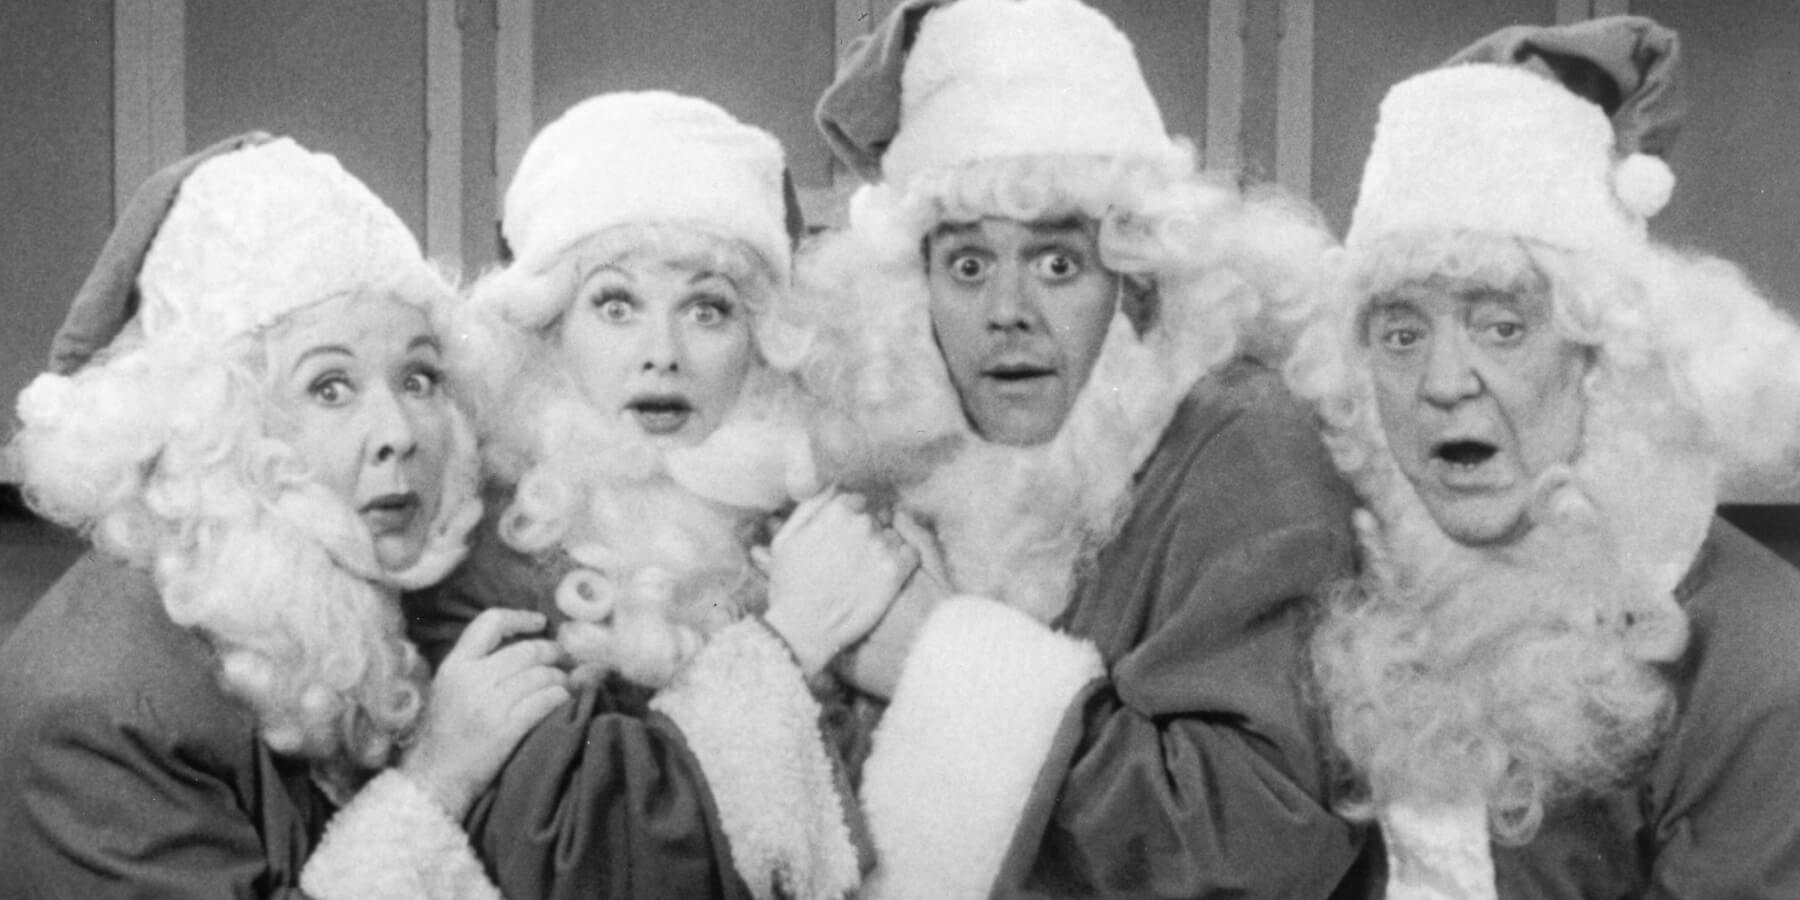 Vivian Vance, Lucille Ball, Desi Arnaz, and William Frawley starred in the 'I Love Lucy' Christmas episode.